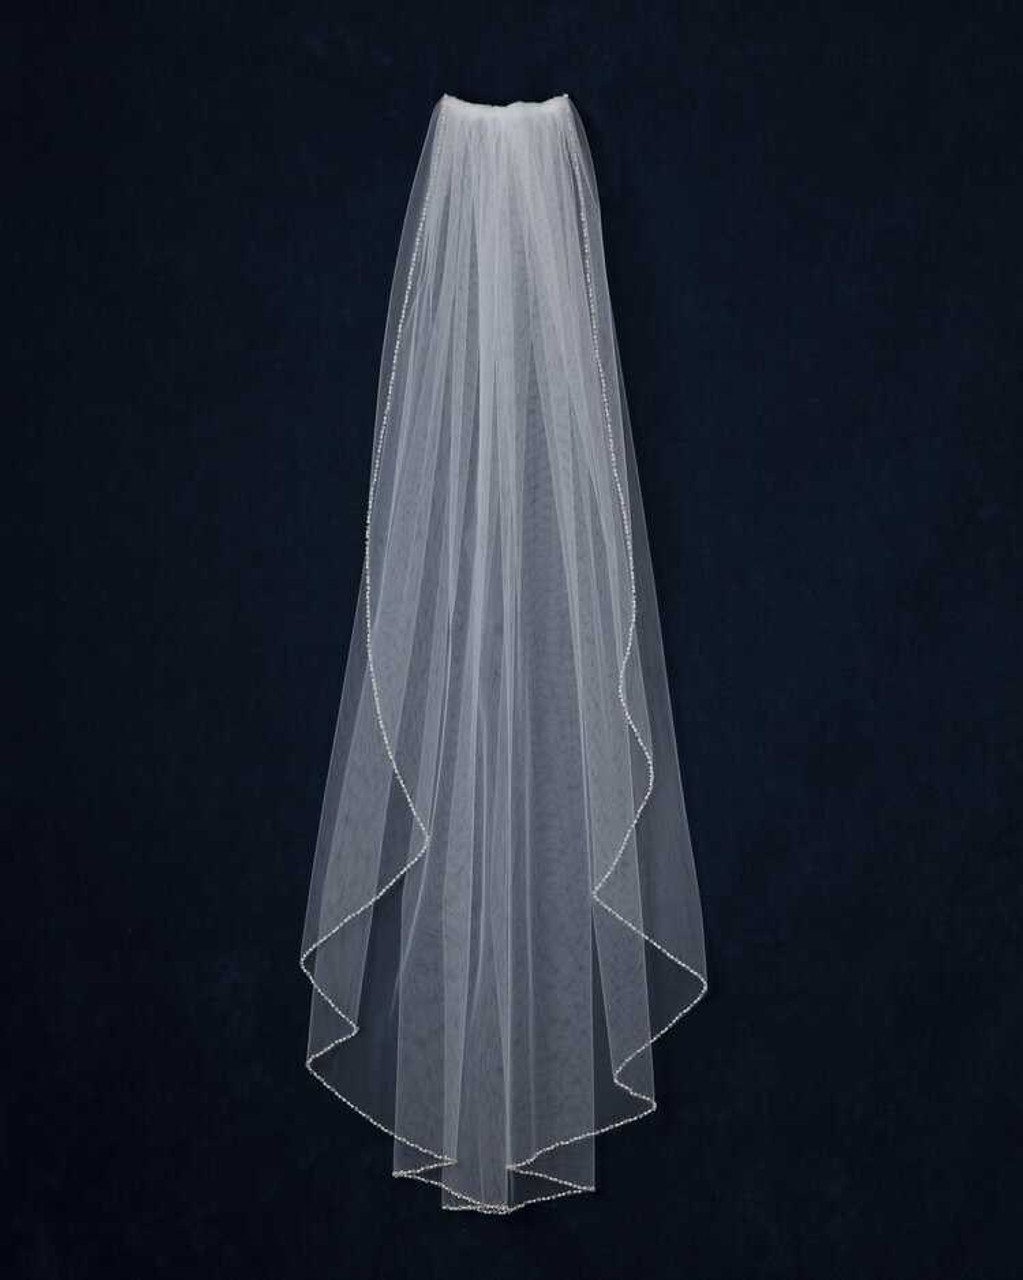 JL Johnson C332 Pearl and Crystal Fingertip or Cathedral Wedding Veil